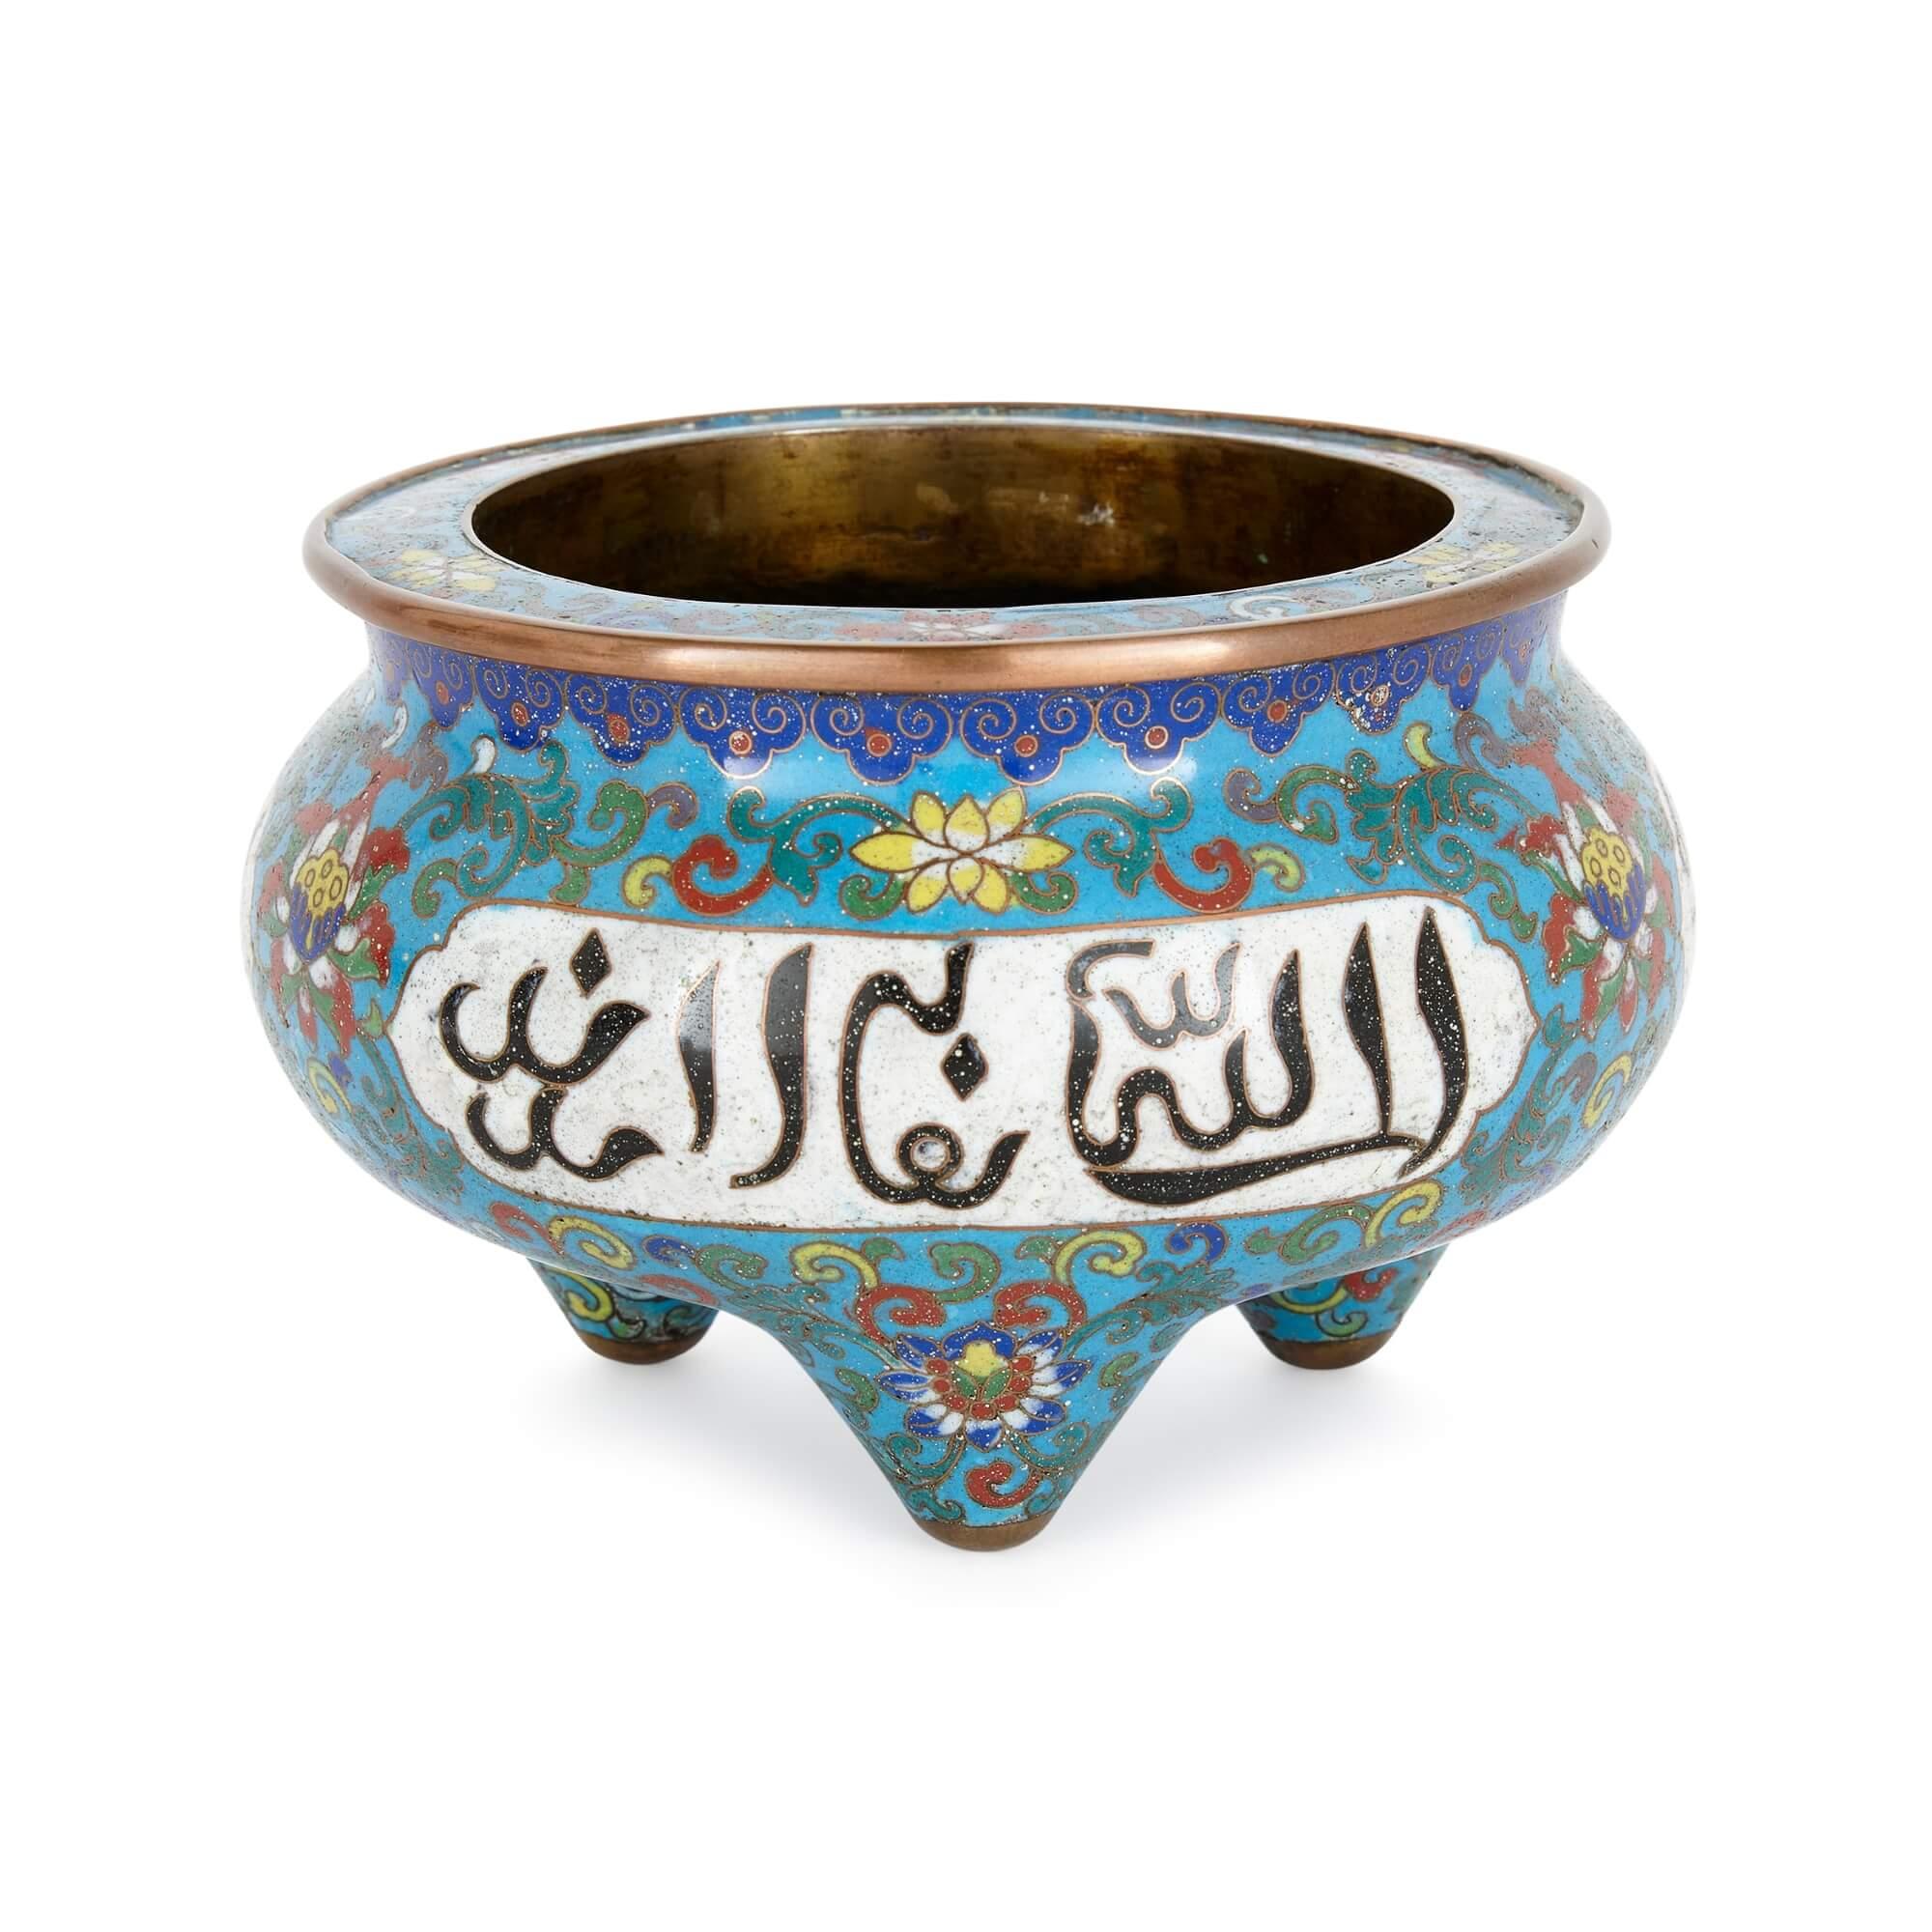 Qing dynasty cloisonné enamel Chinese vase with Arabic inscriptions.
Chinese, 19th century
Measures: height 11cm, diameter 17cm.

Crafted for the Persian market, as evident from the Arabic inscriptions, this piece is a fine Qing dynasty